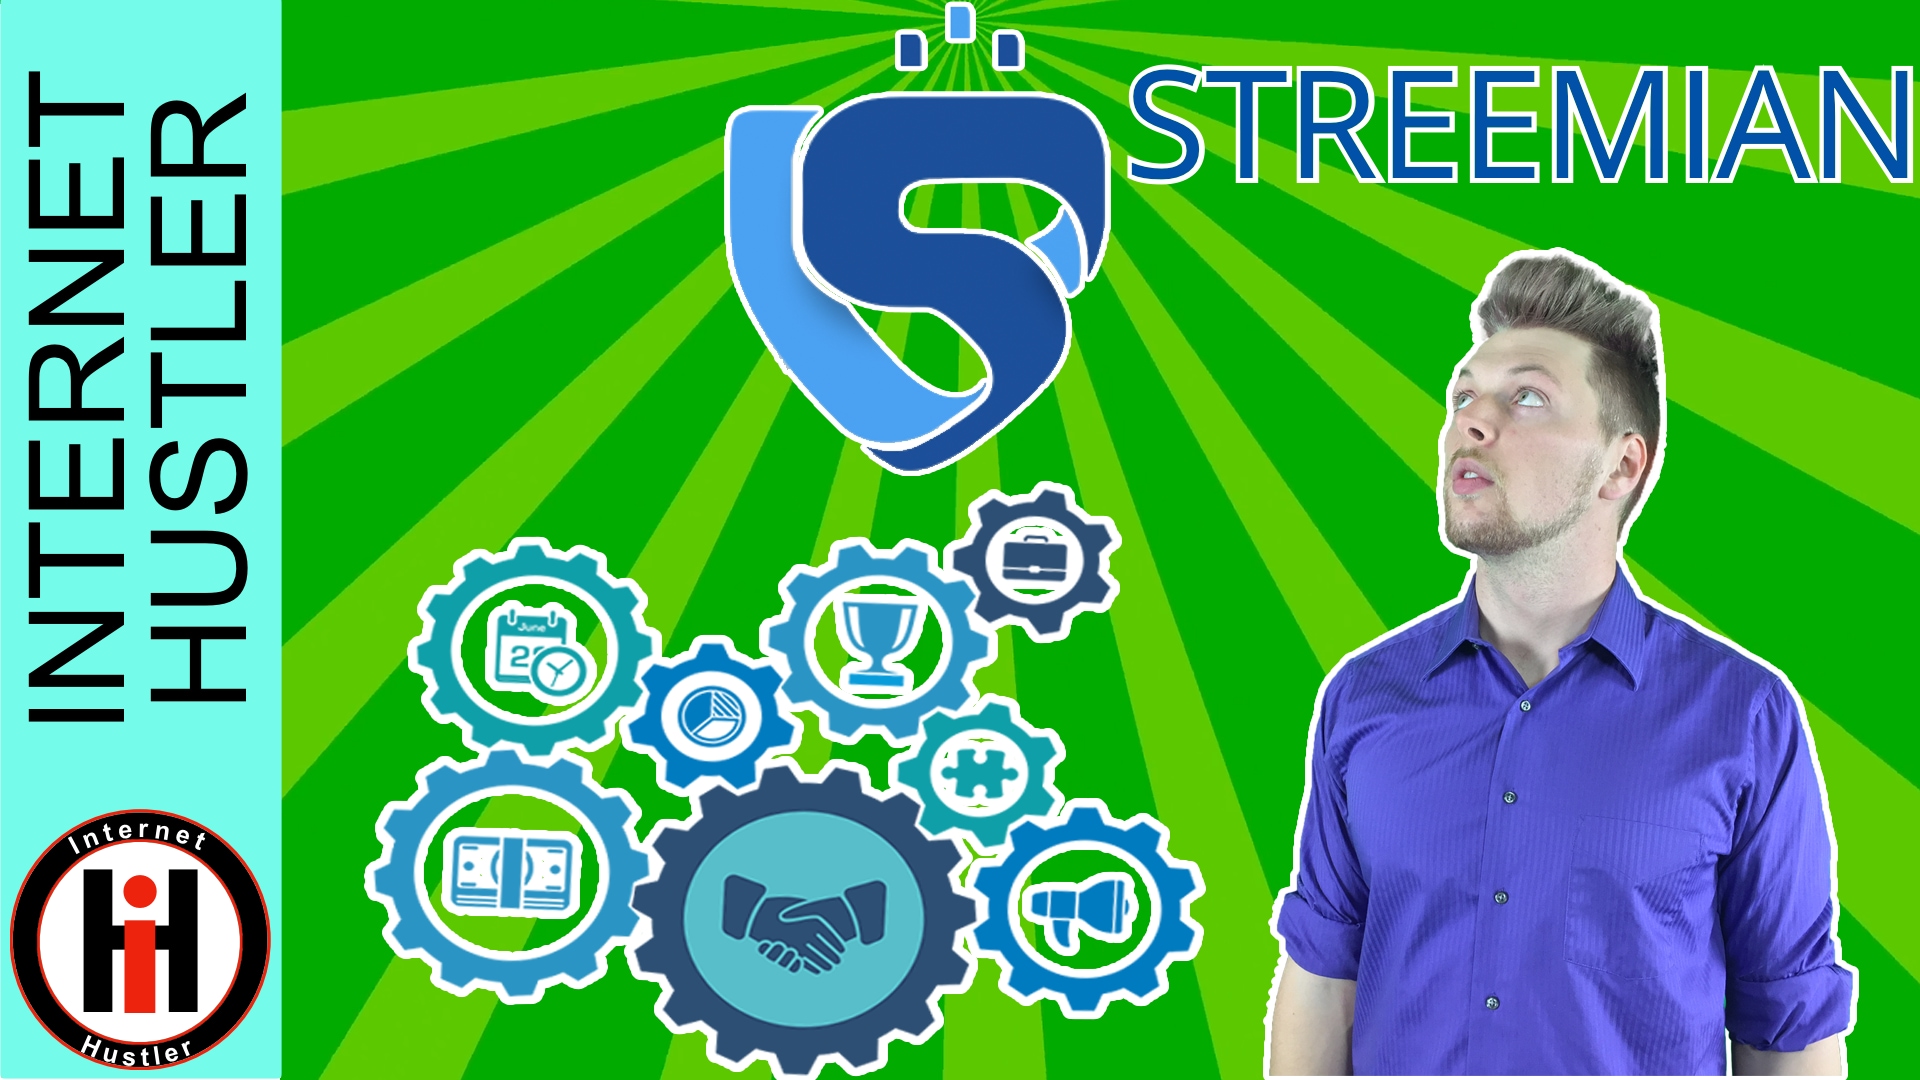 Overview Of Streemian Services For Steemit